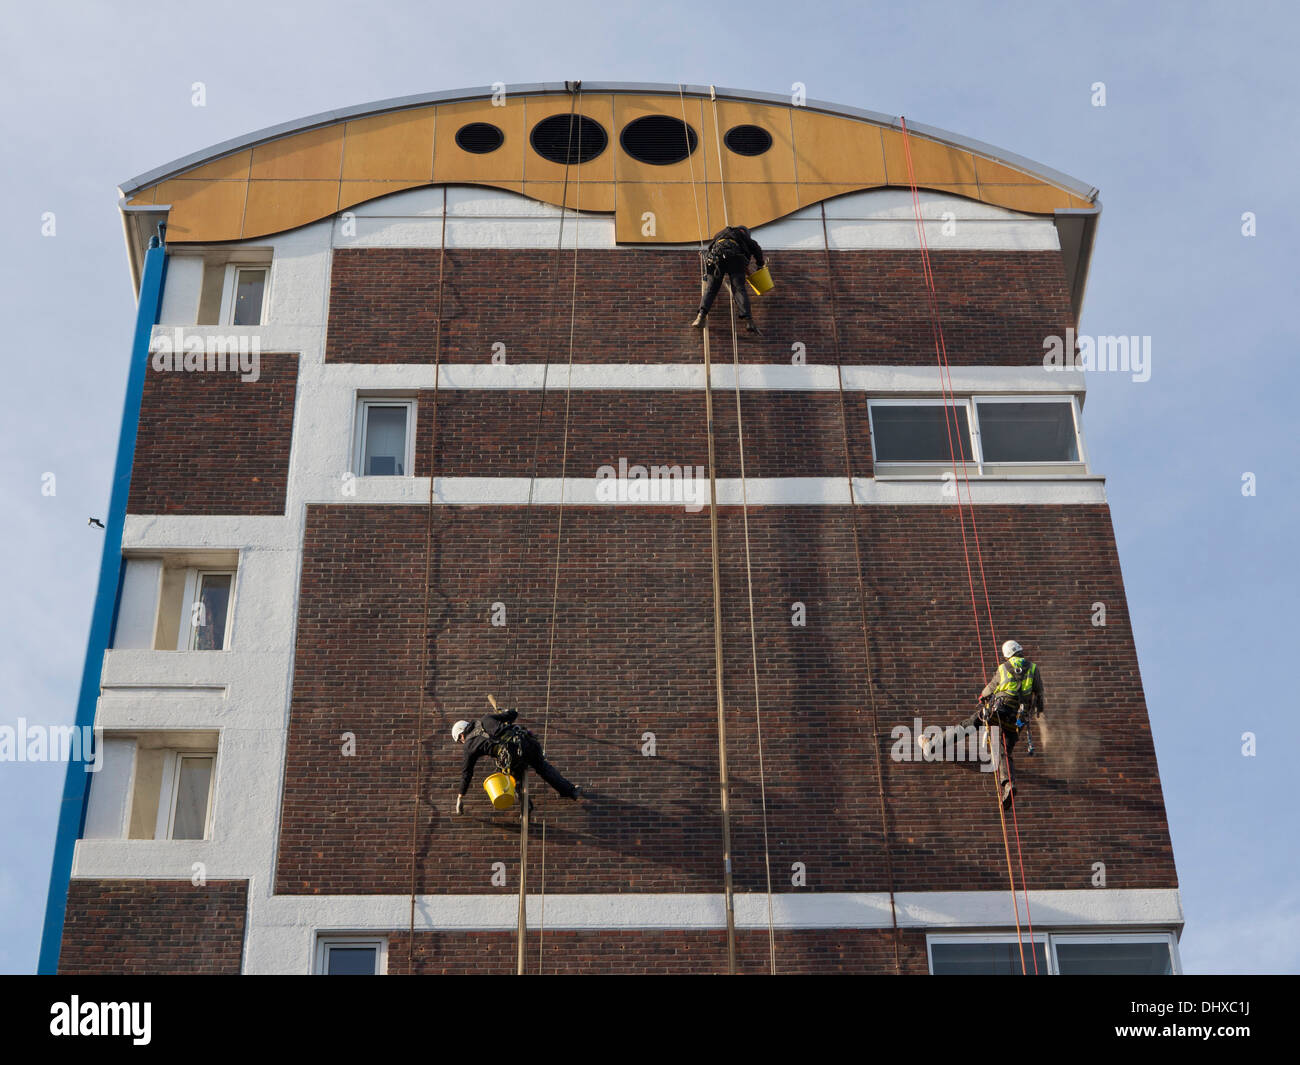 Workers cleaning the walls of a council housing estate in Hackney, London, UK Stock Photo